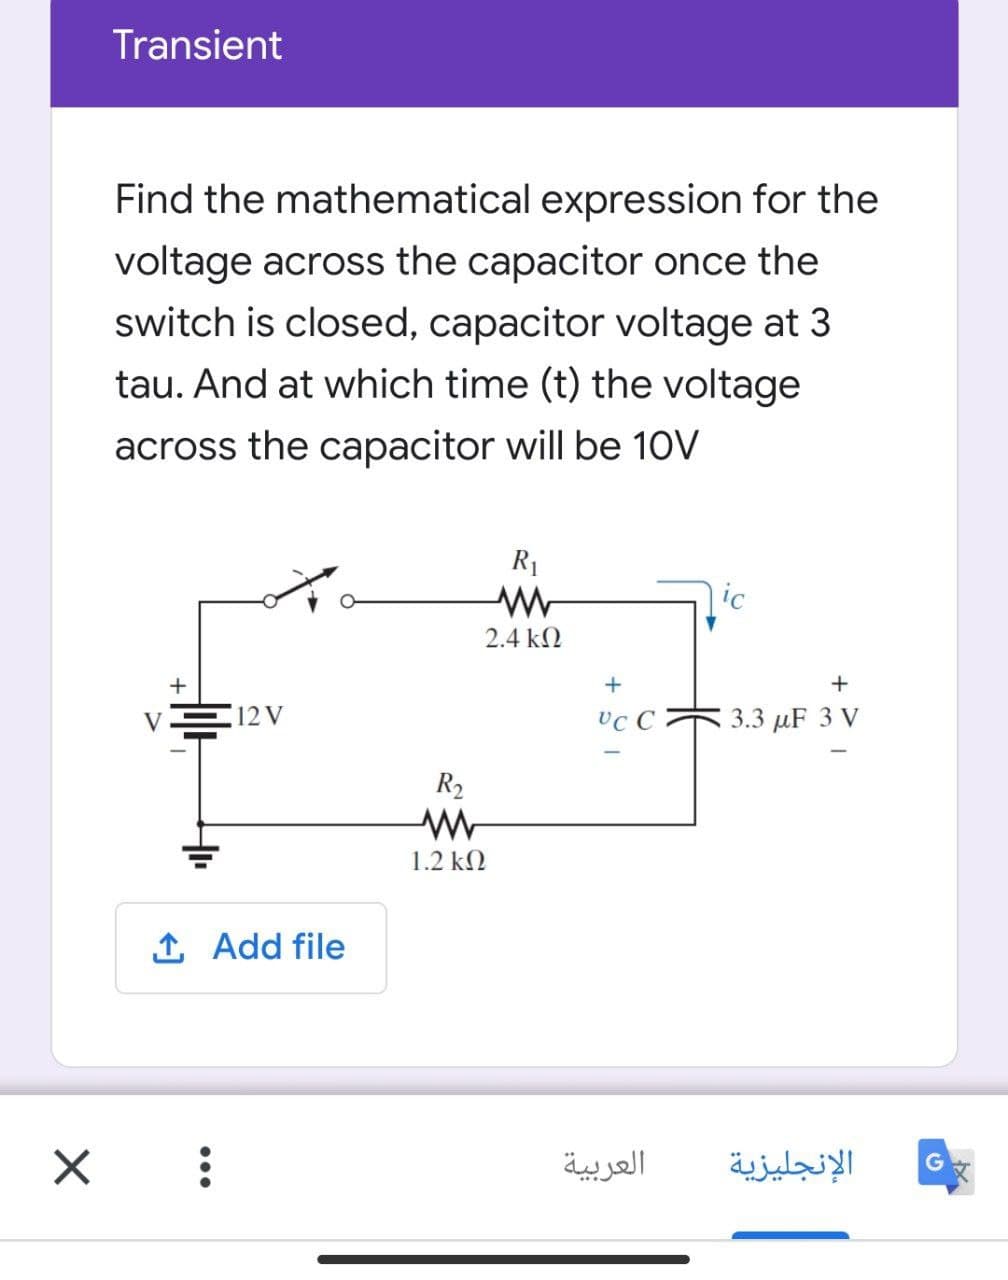 Transient
Find the mathematical expression for the
voltage across the capacitor once the
switch is closed, capacitor voltage at 3
tau. And at which time (t) the voltage
across the capacitor will be 10V
R1
ic
2.4 k2
+
VE12V
vc C
3.3 µF 3 V
R2
1.2 kN
1 Add file
العربية
الإنجليزية
